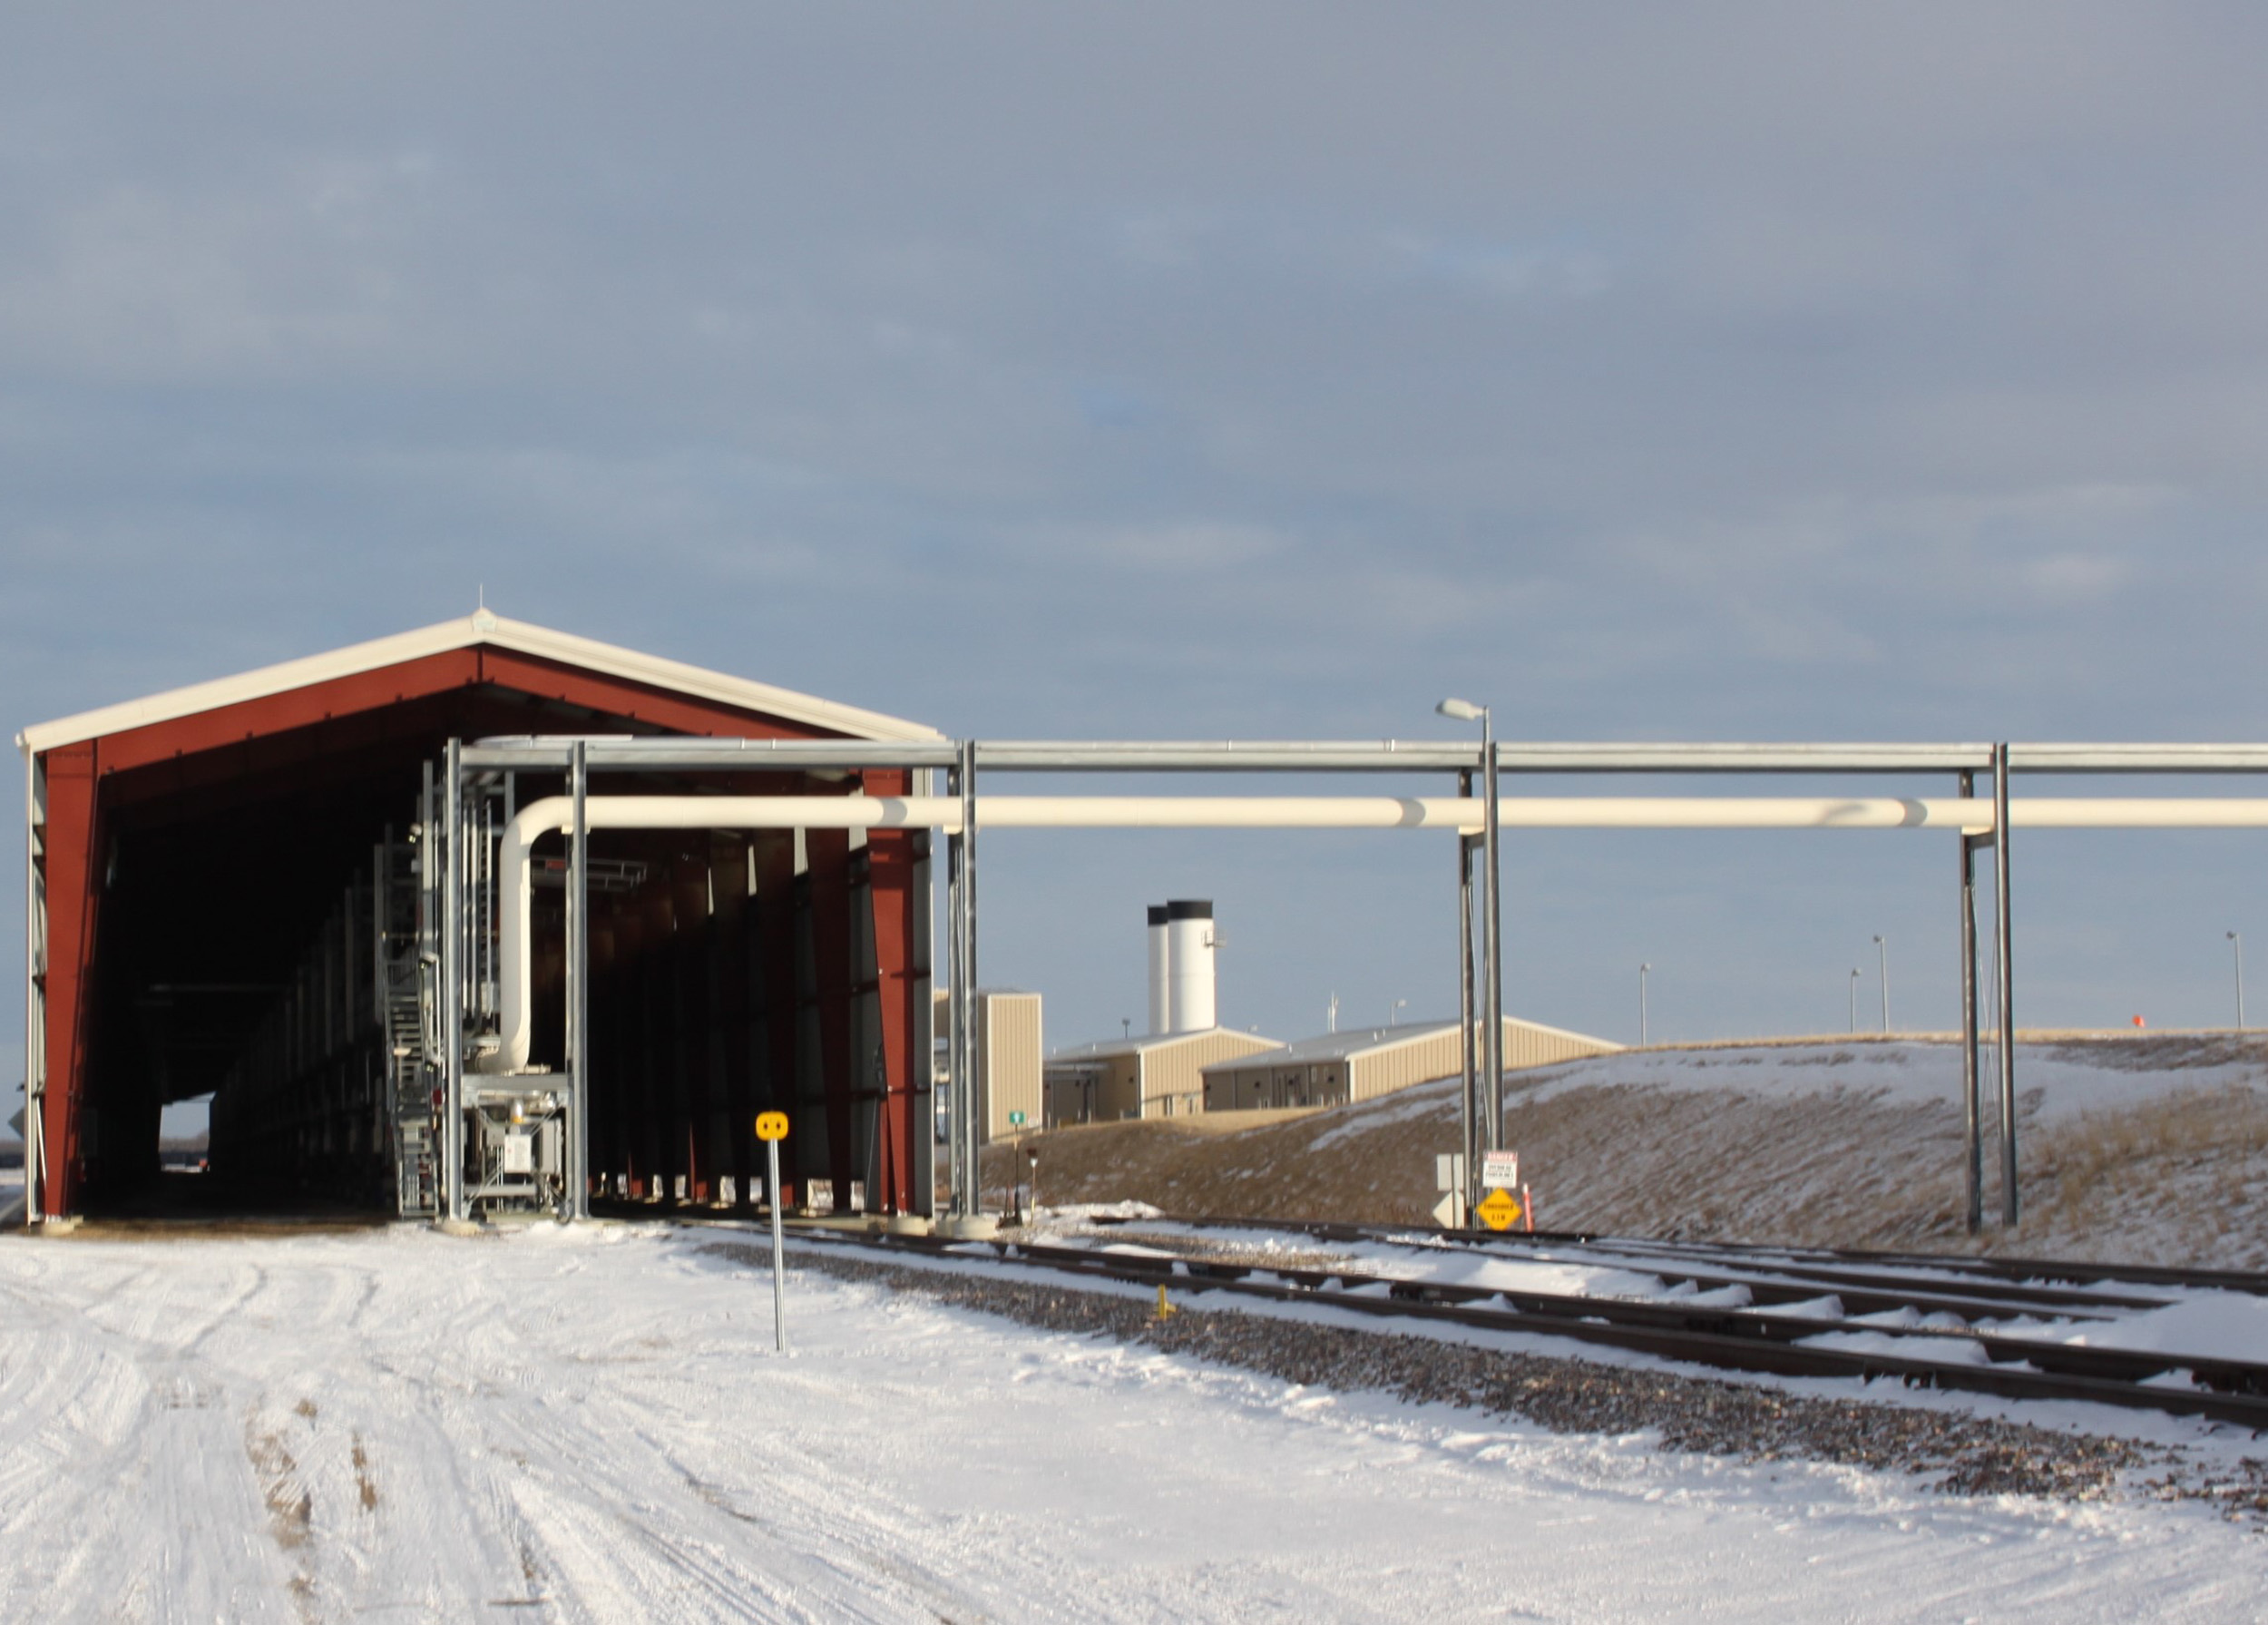 Wilson & Company performed engineering and design services on the expansion of the existing Hardisty terminal in Hardisty, Alberta, Canada.